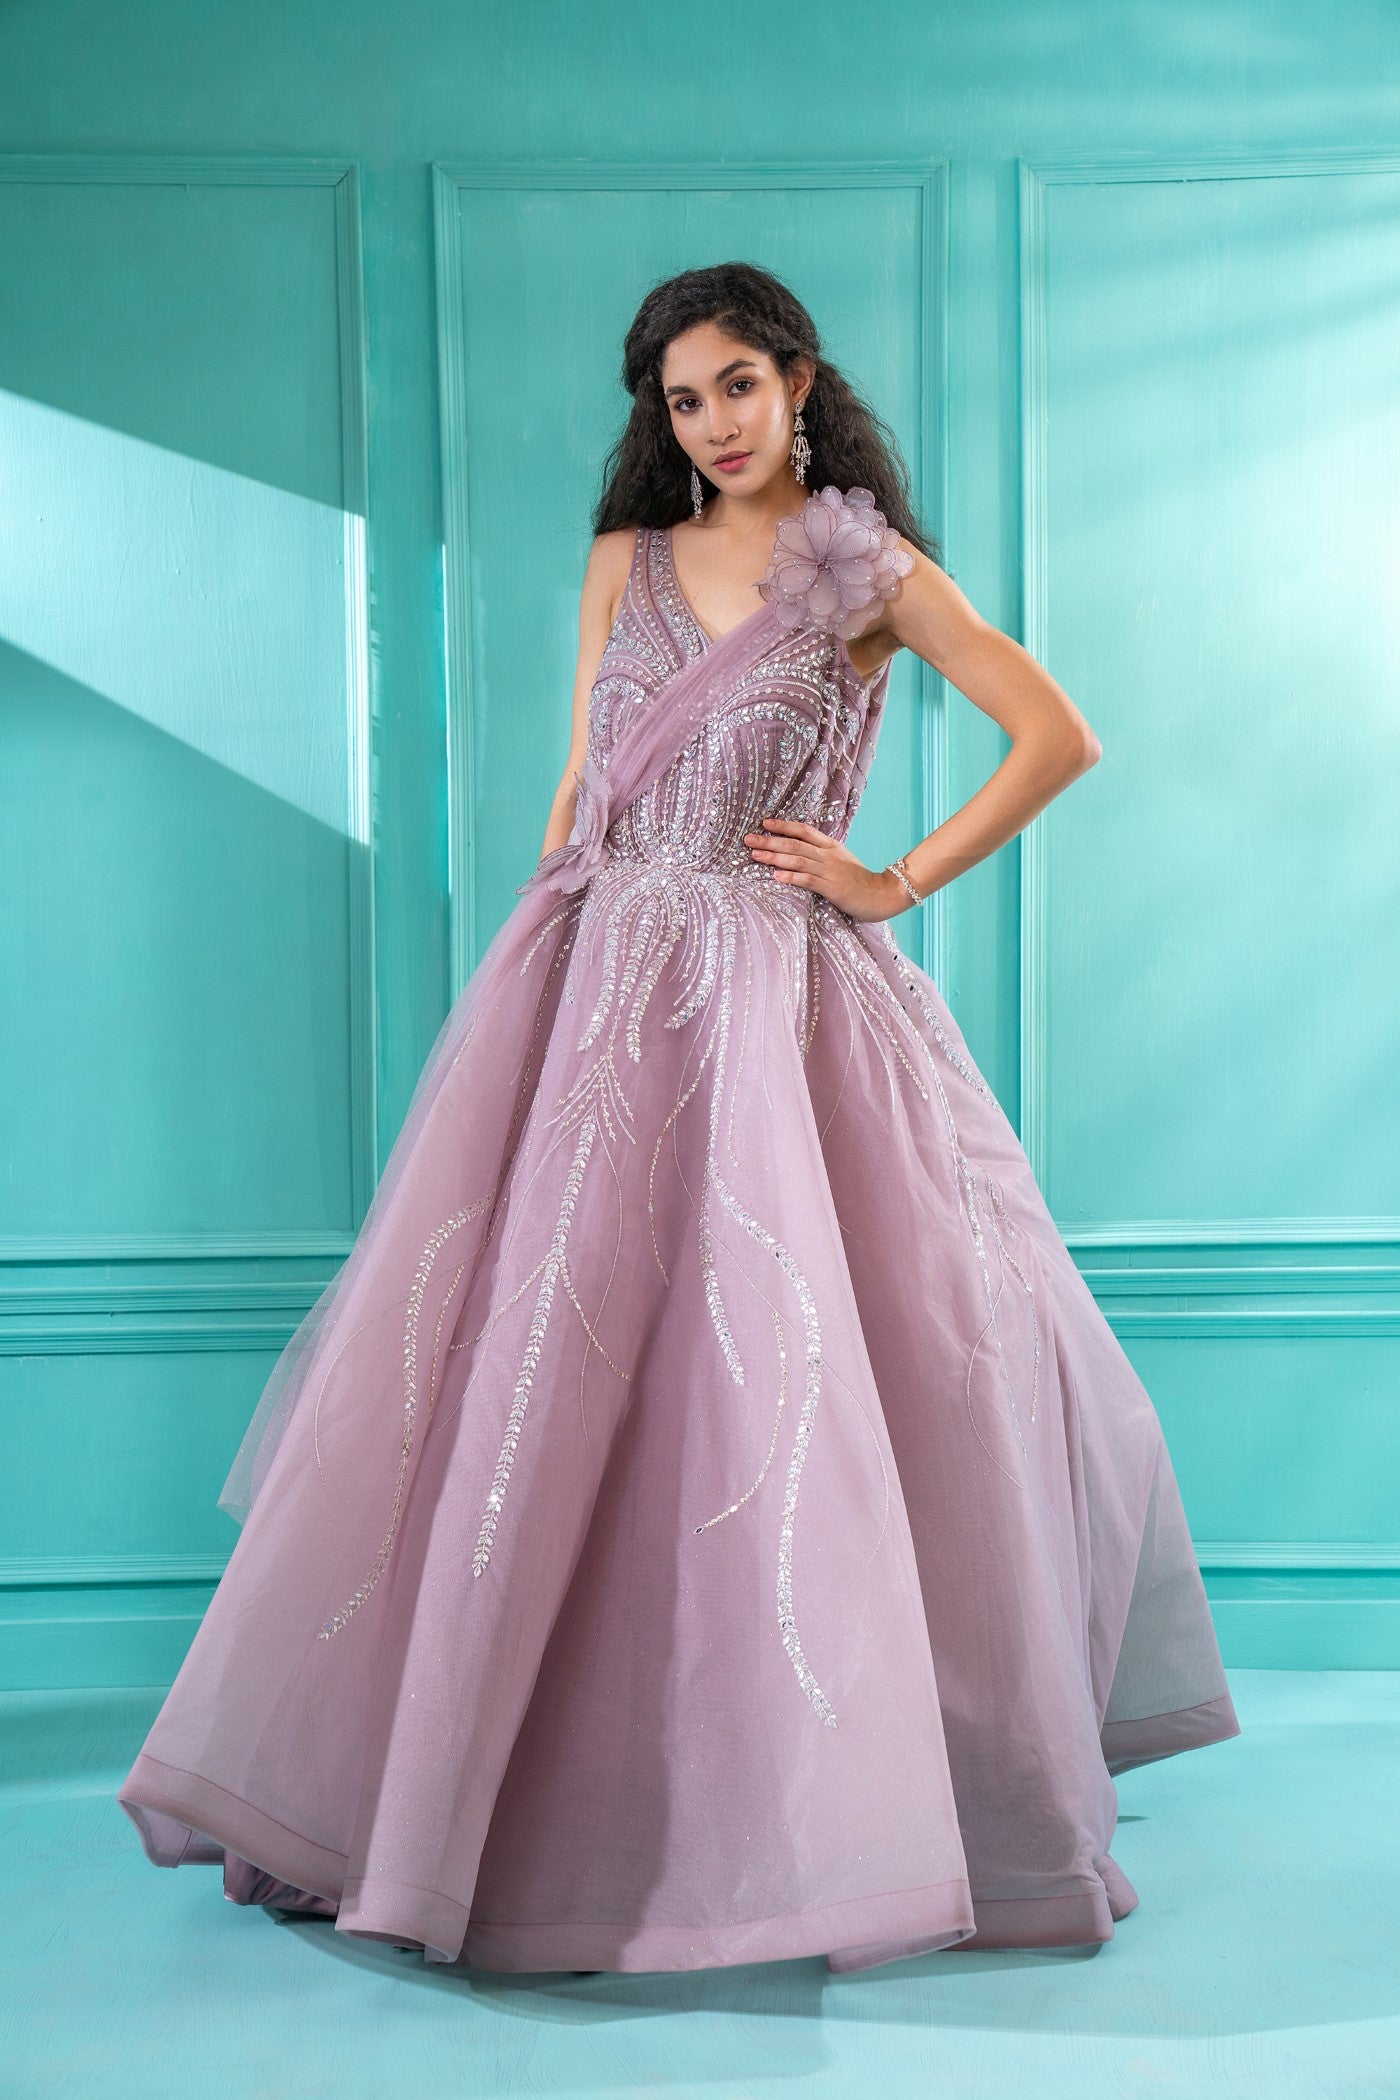 Buy Latest Indian Gown dress Online Shopping For Women – Joshindia